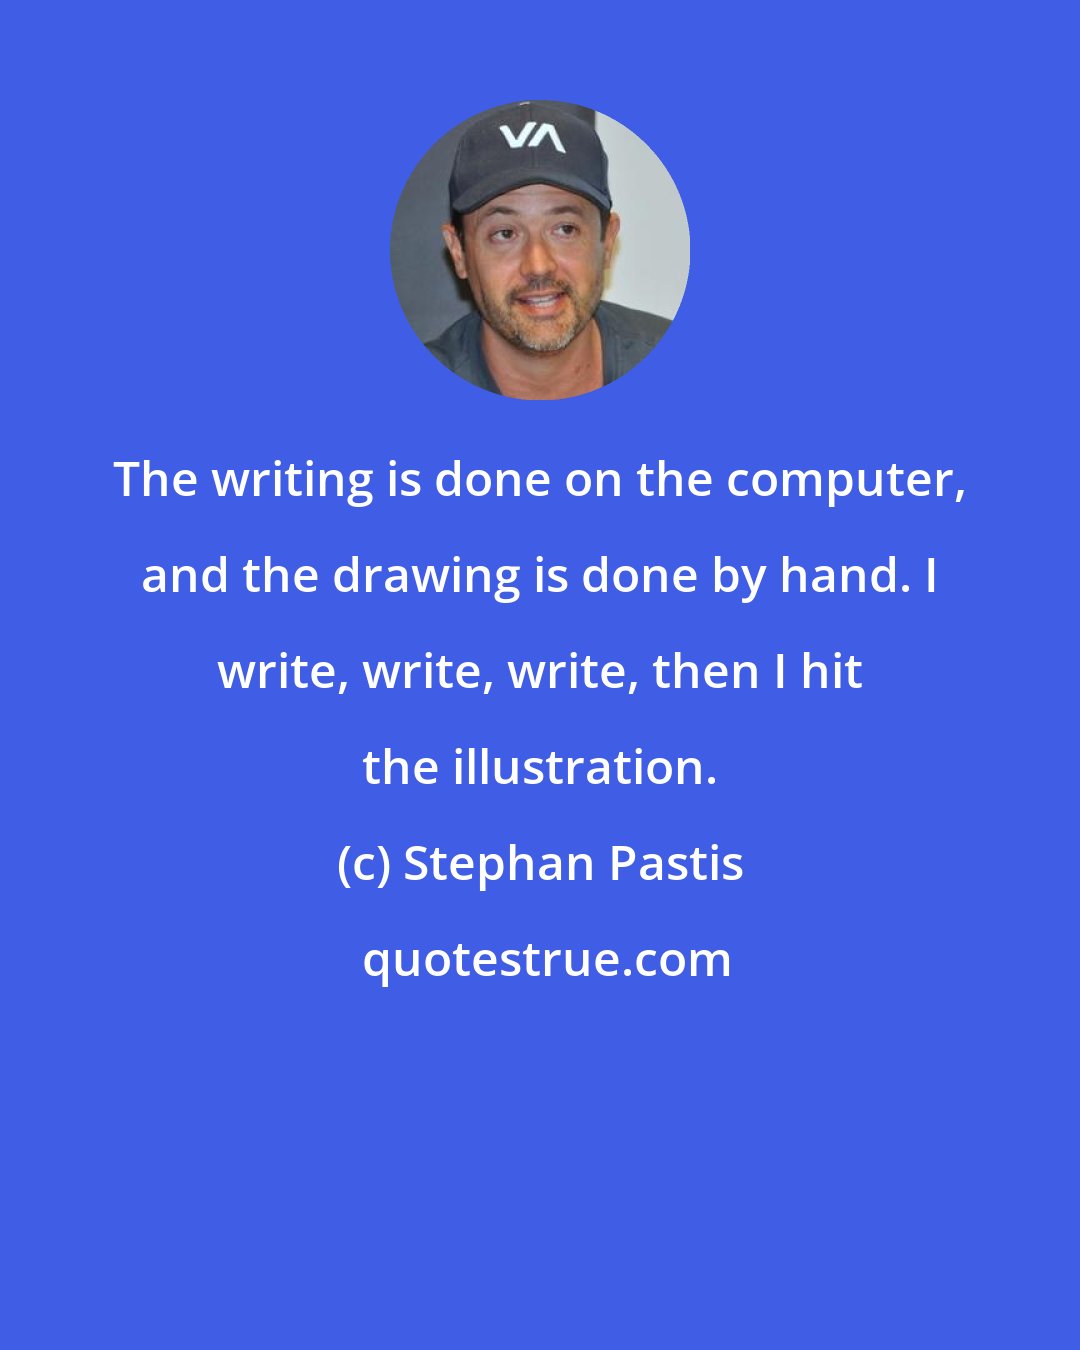 Stephan Pastis: The writing is done on the computer, and the drawing is done by hand. I write, write, write, then I hit the illustration.